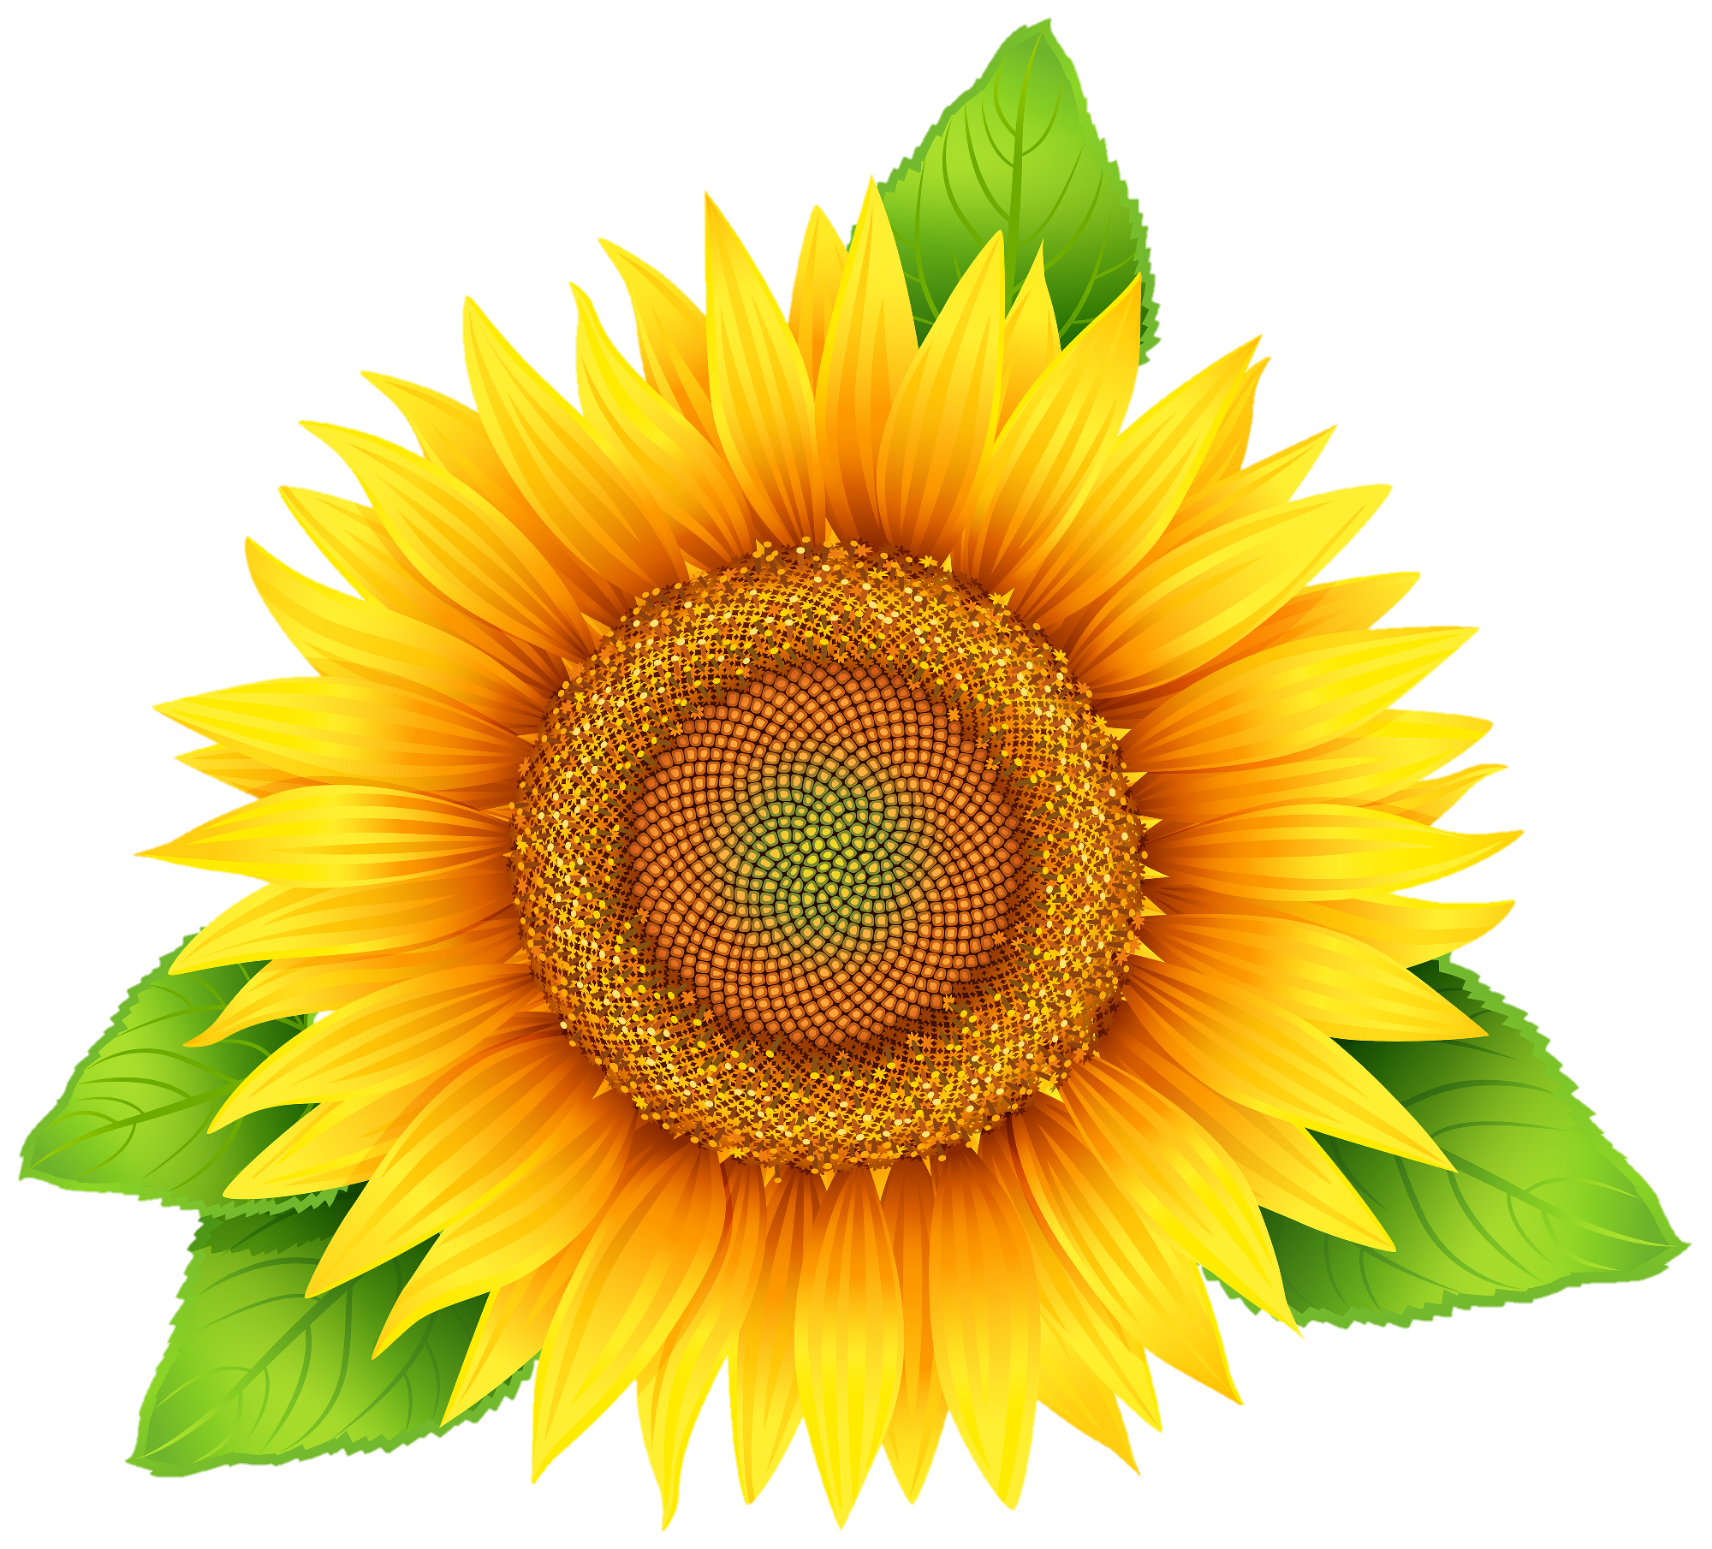 sunflower-png-image-from-pngfre-2